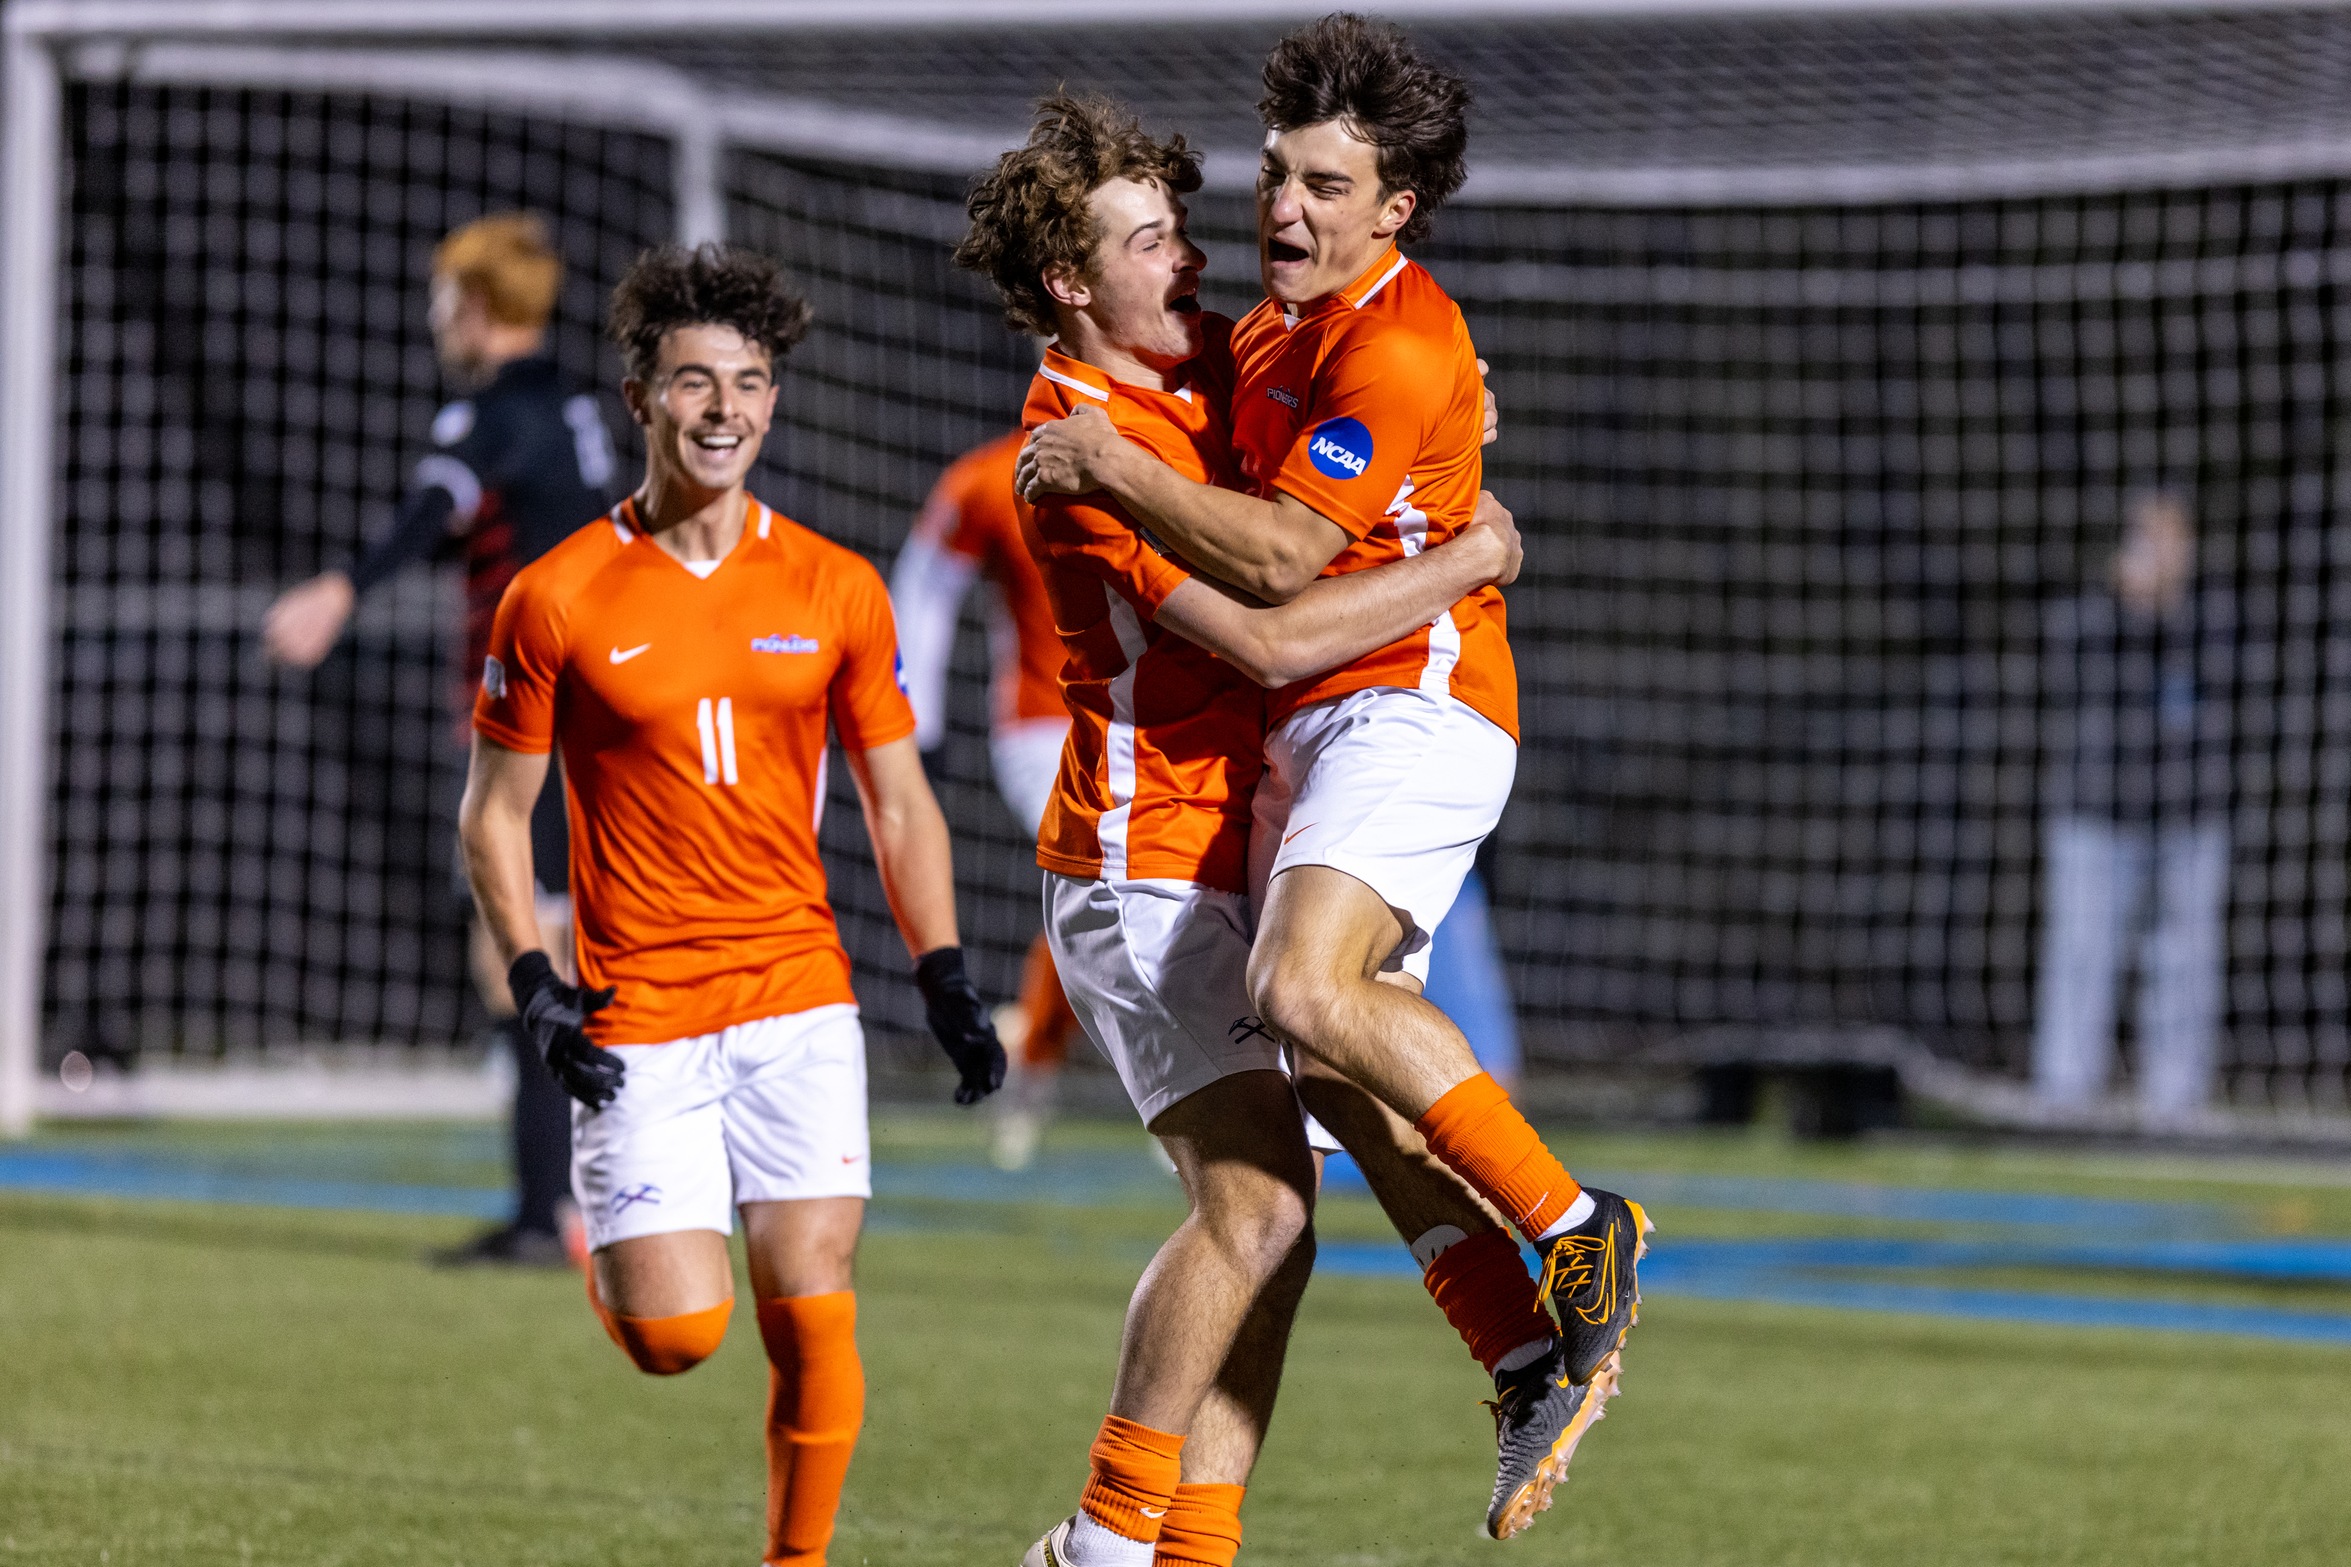 Wisconsin-Platteville Advances To NCAA Second Round With Shutout Win